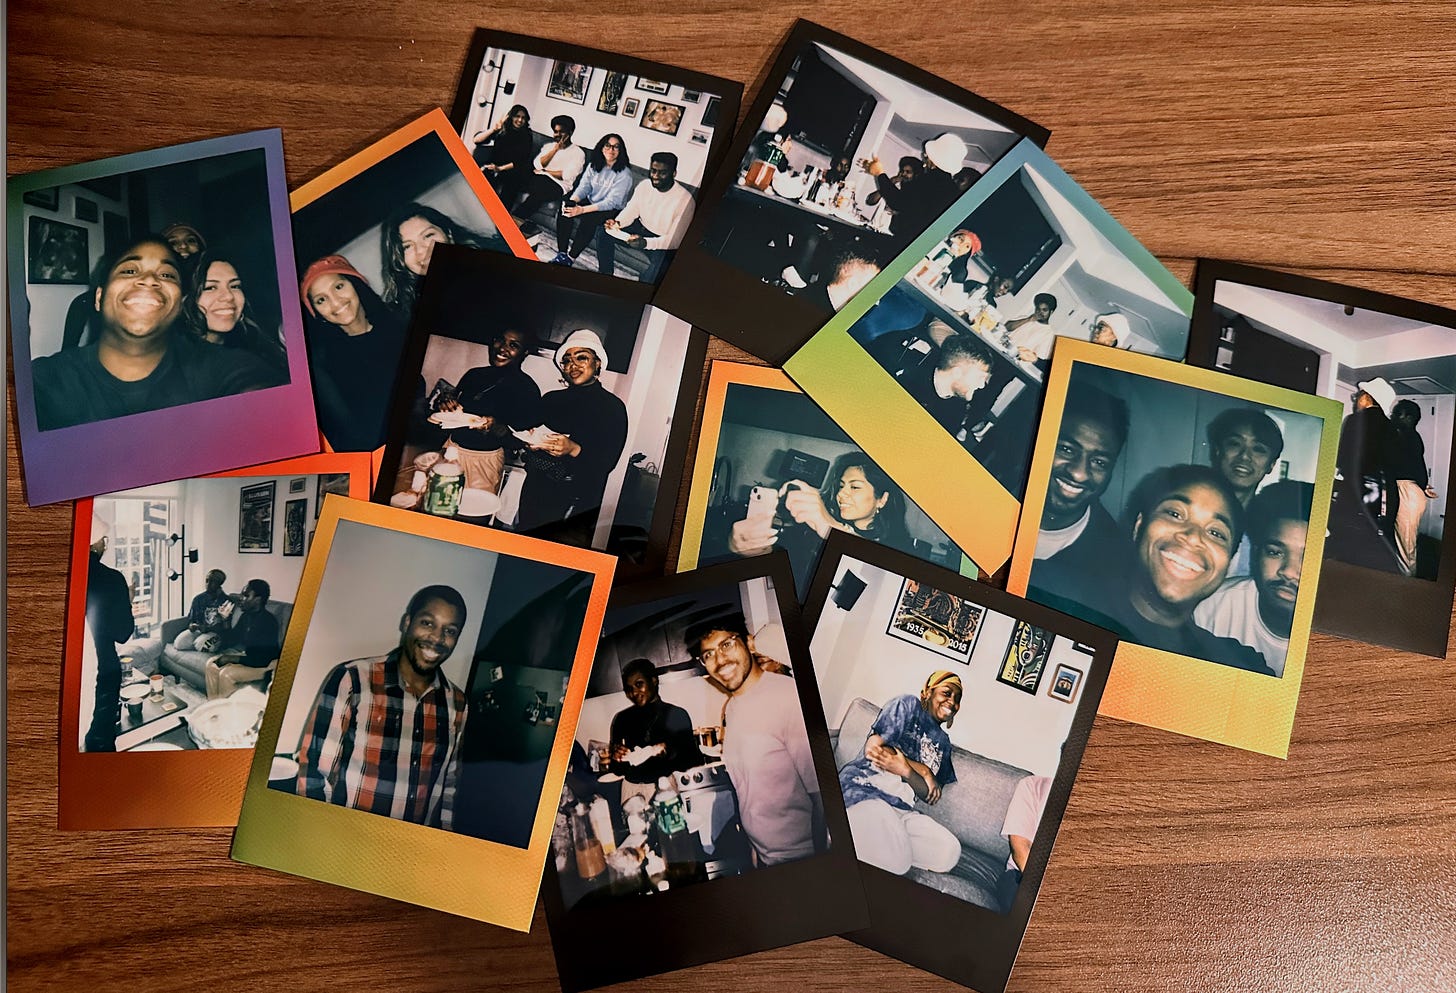 A collage of Polaroid photos from beignets in the boroughs